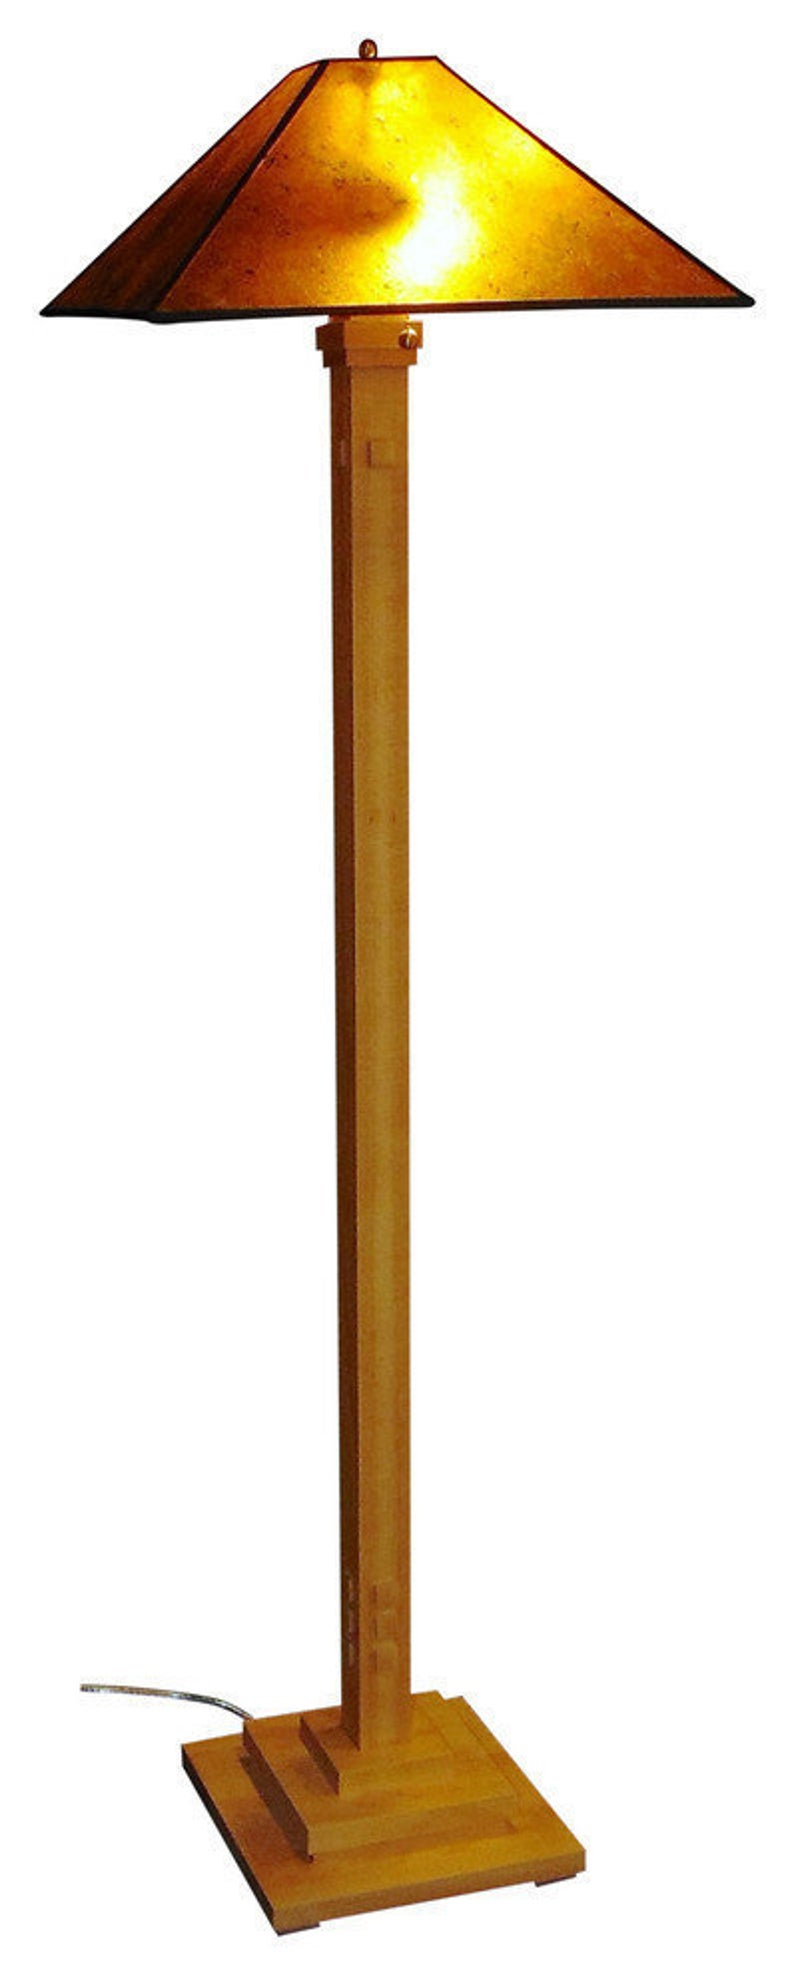 Floor Lamp New Haven Model 60 Tall Hard Maple Amber Mica Shade Mission Other Woods And Shades Available with regard to size 794 X 1975